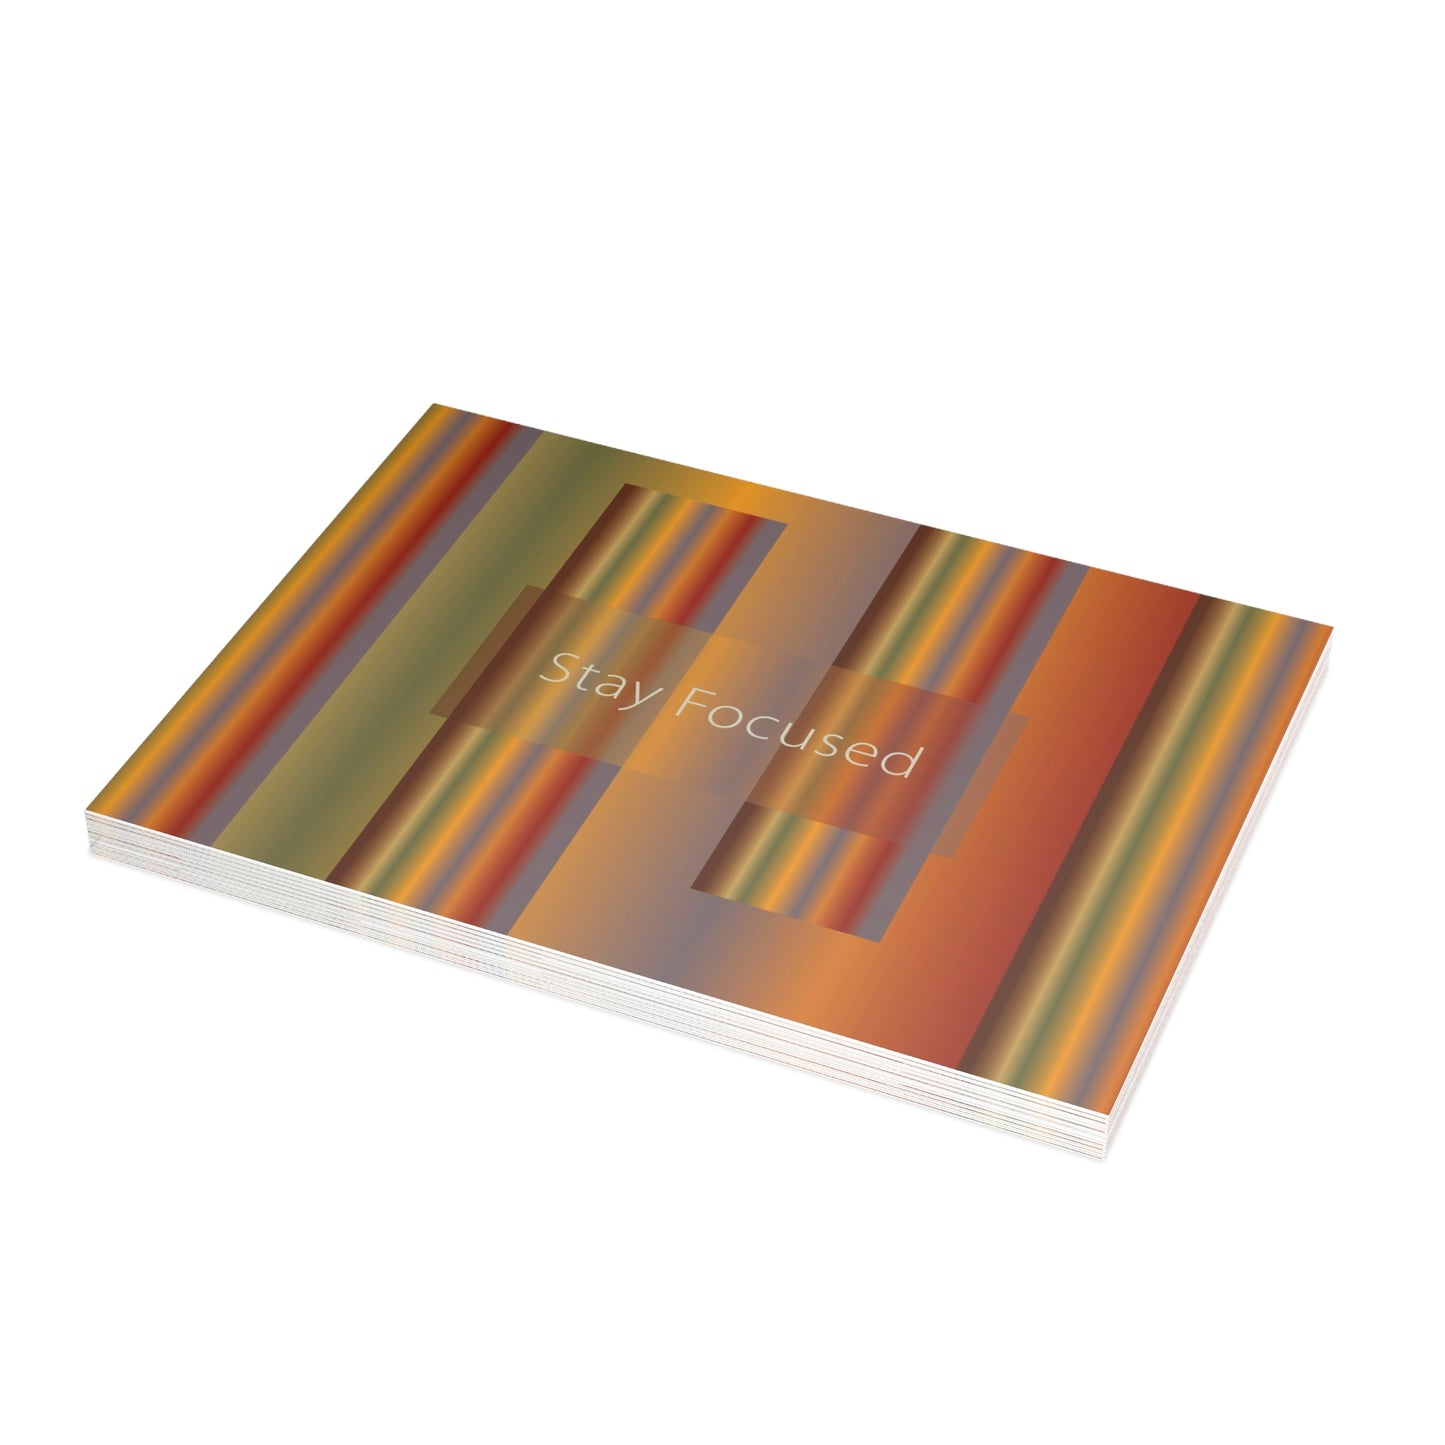 Unfolded Greeting Cards Horizontal (10, 30, and 50pcs) Stay Focused - Design No.1700